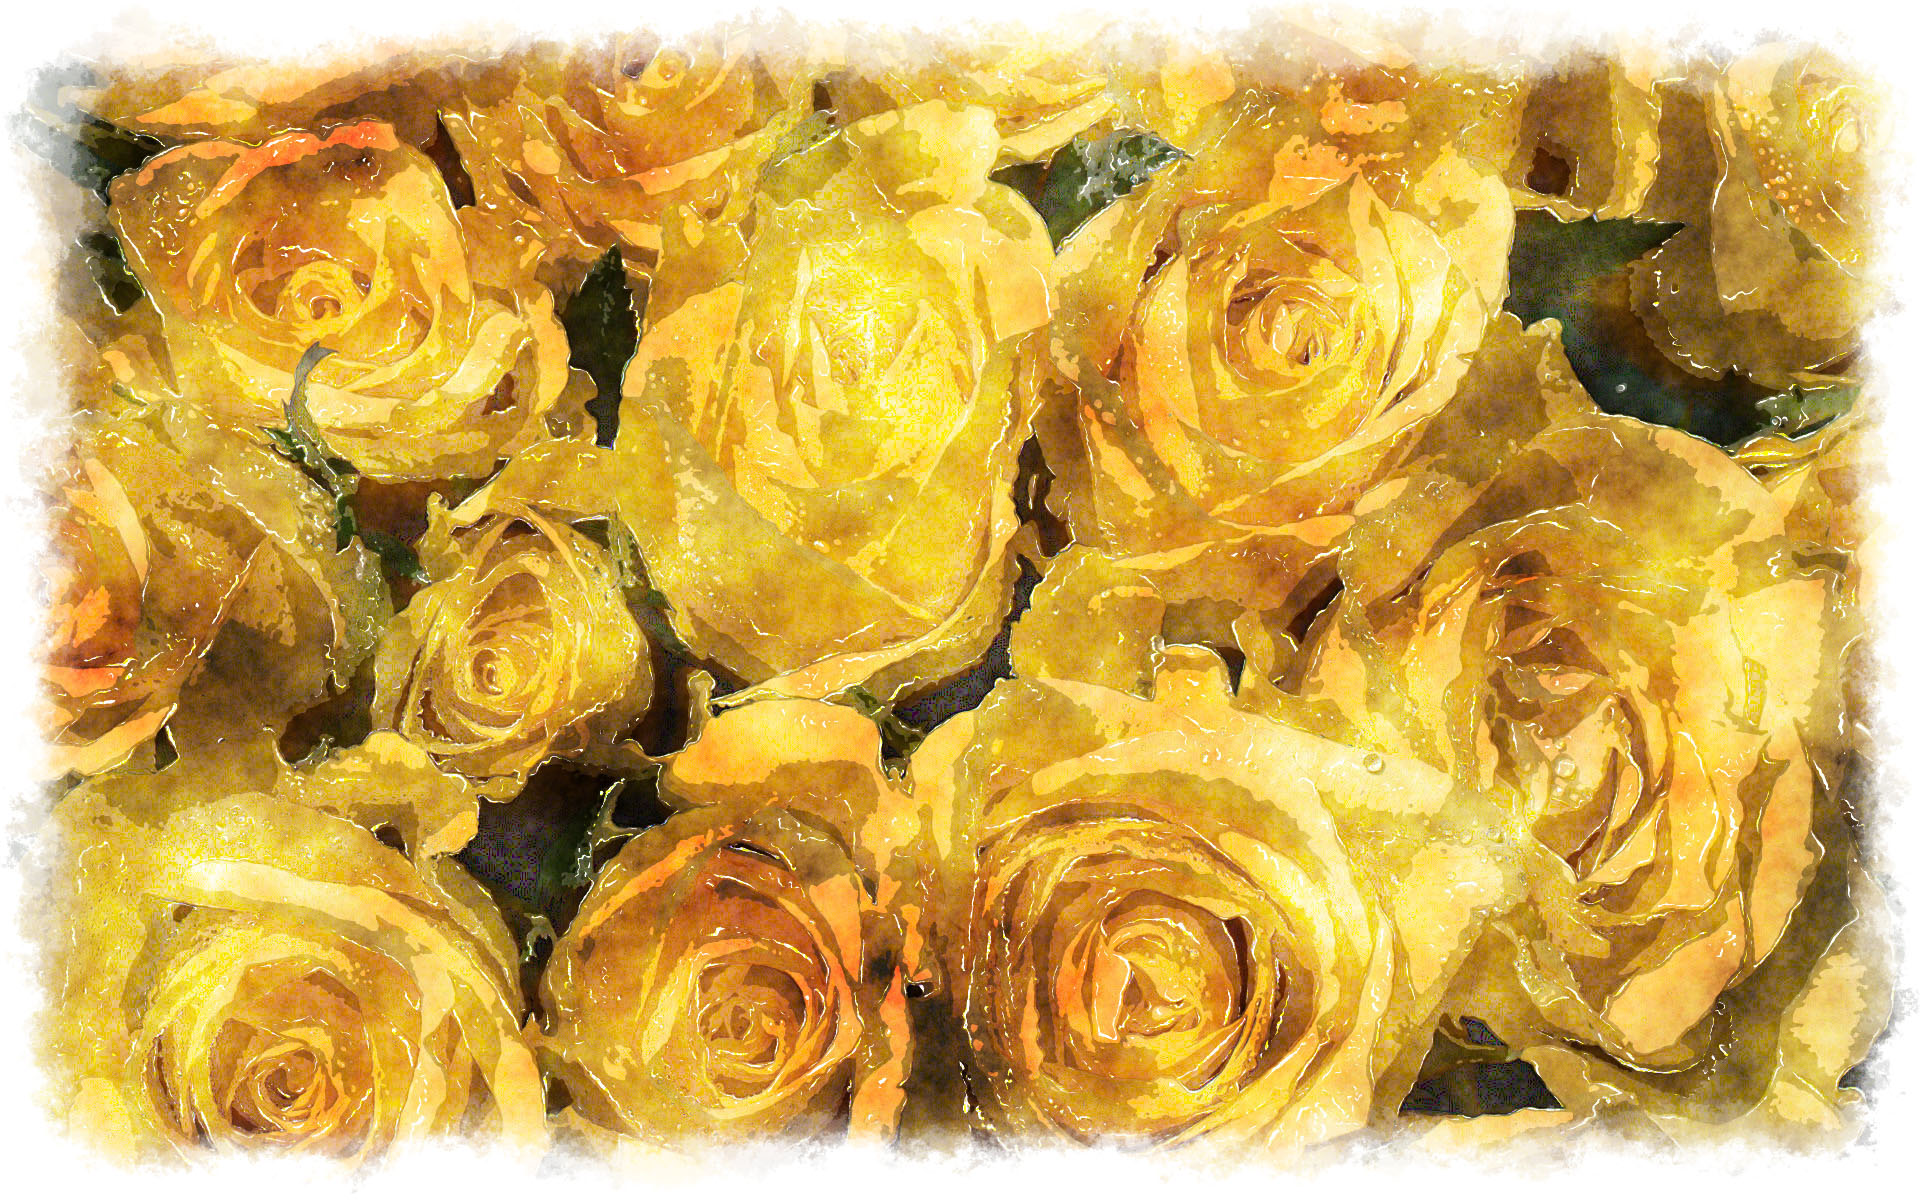 Yellow Roses Bouquet Watercolor - Watercolor Painting - HD Wallpaper 